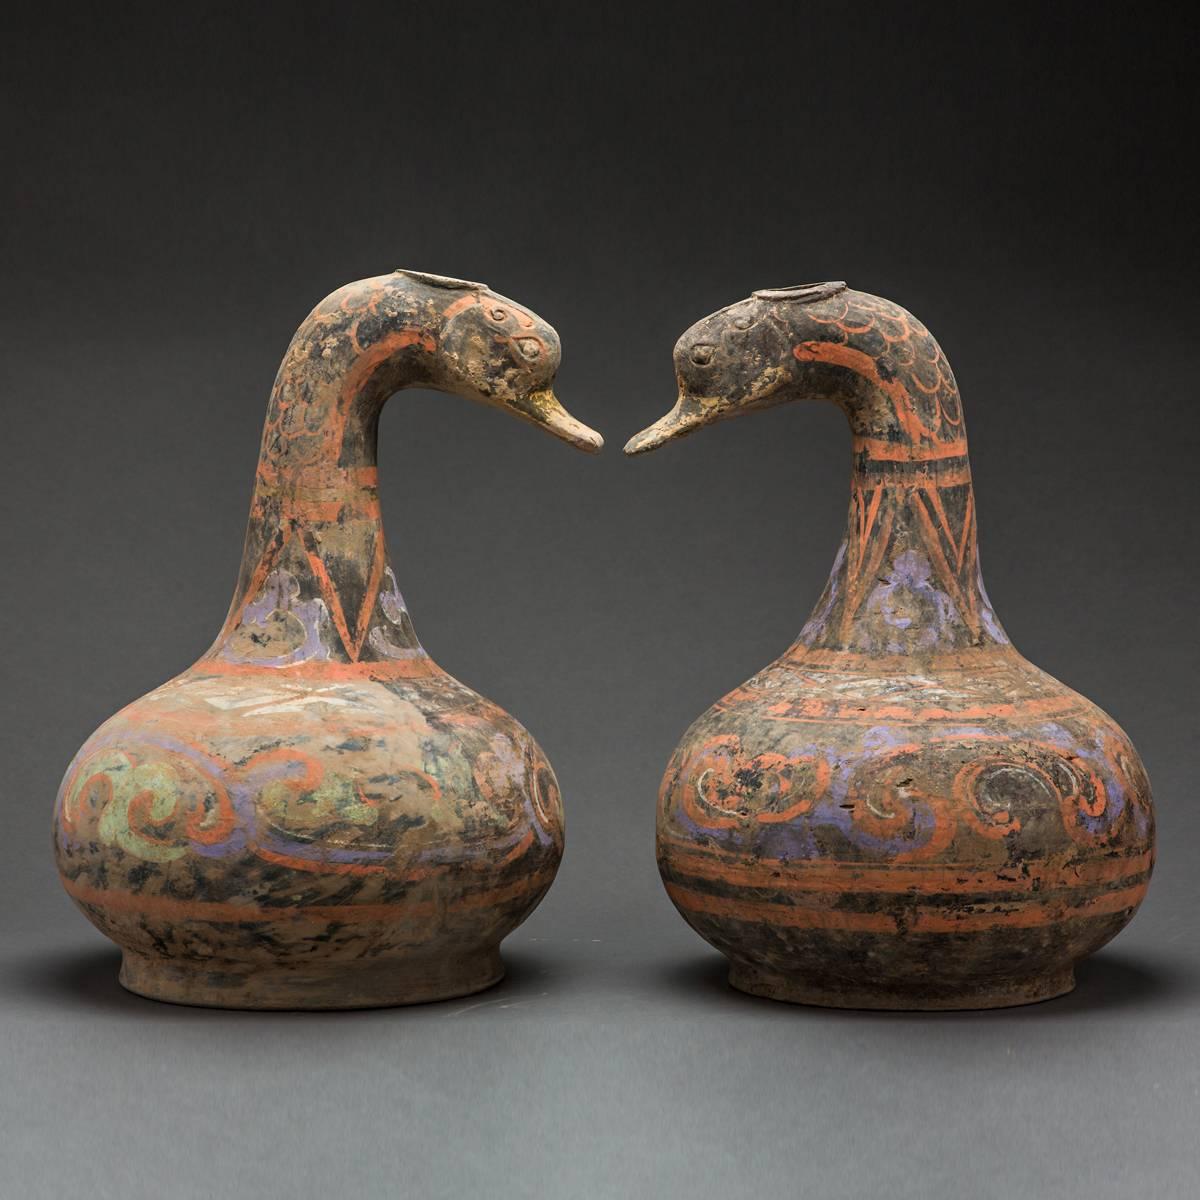 These highly unusual vessels are funerary containers, that were interred with a deceased person of considerable social standing in order to aid their passage into the hereafter. The Han period is known for extensive sociopolitical change followed by